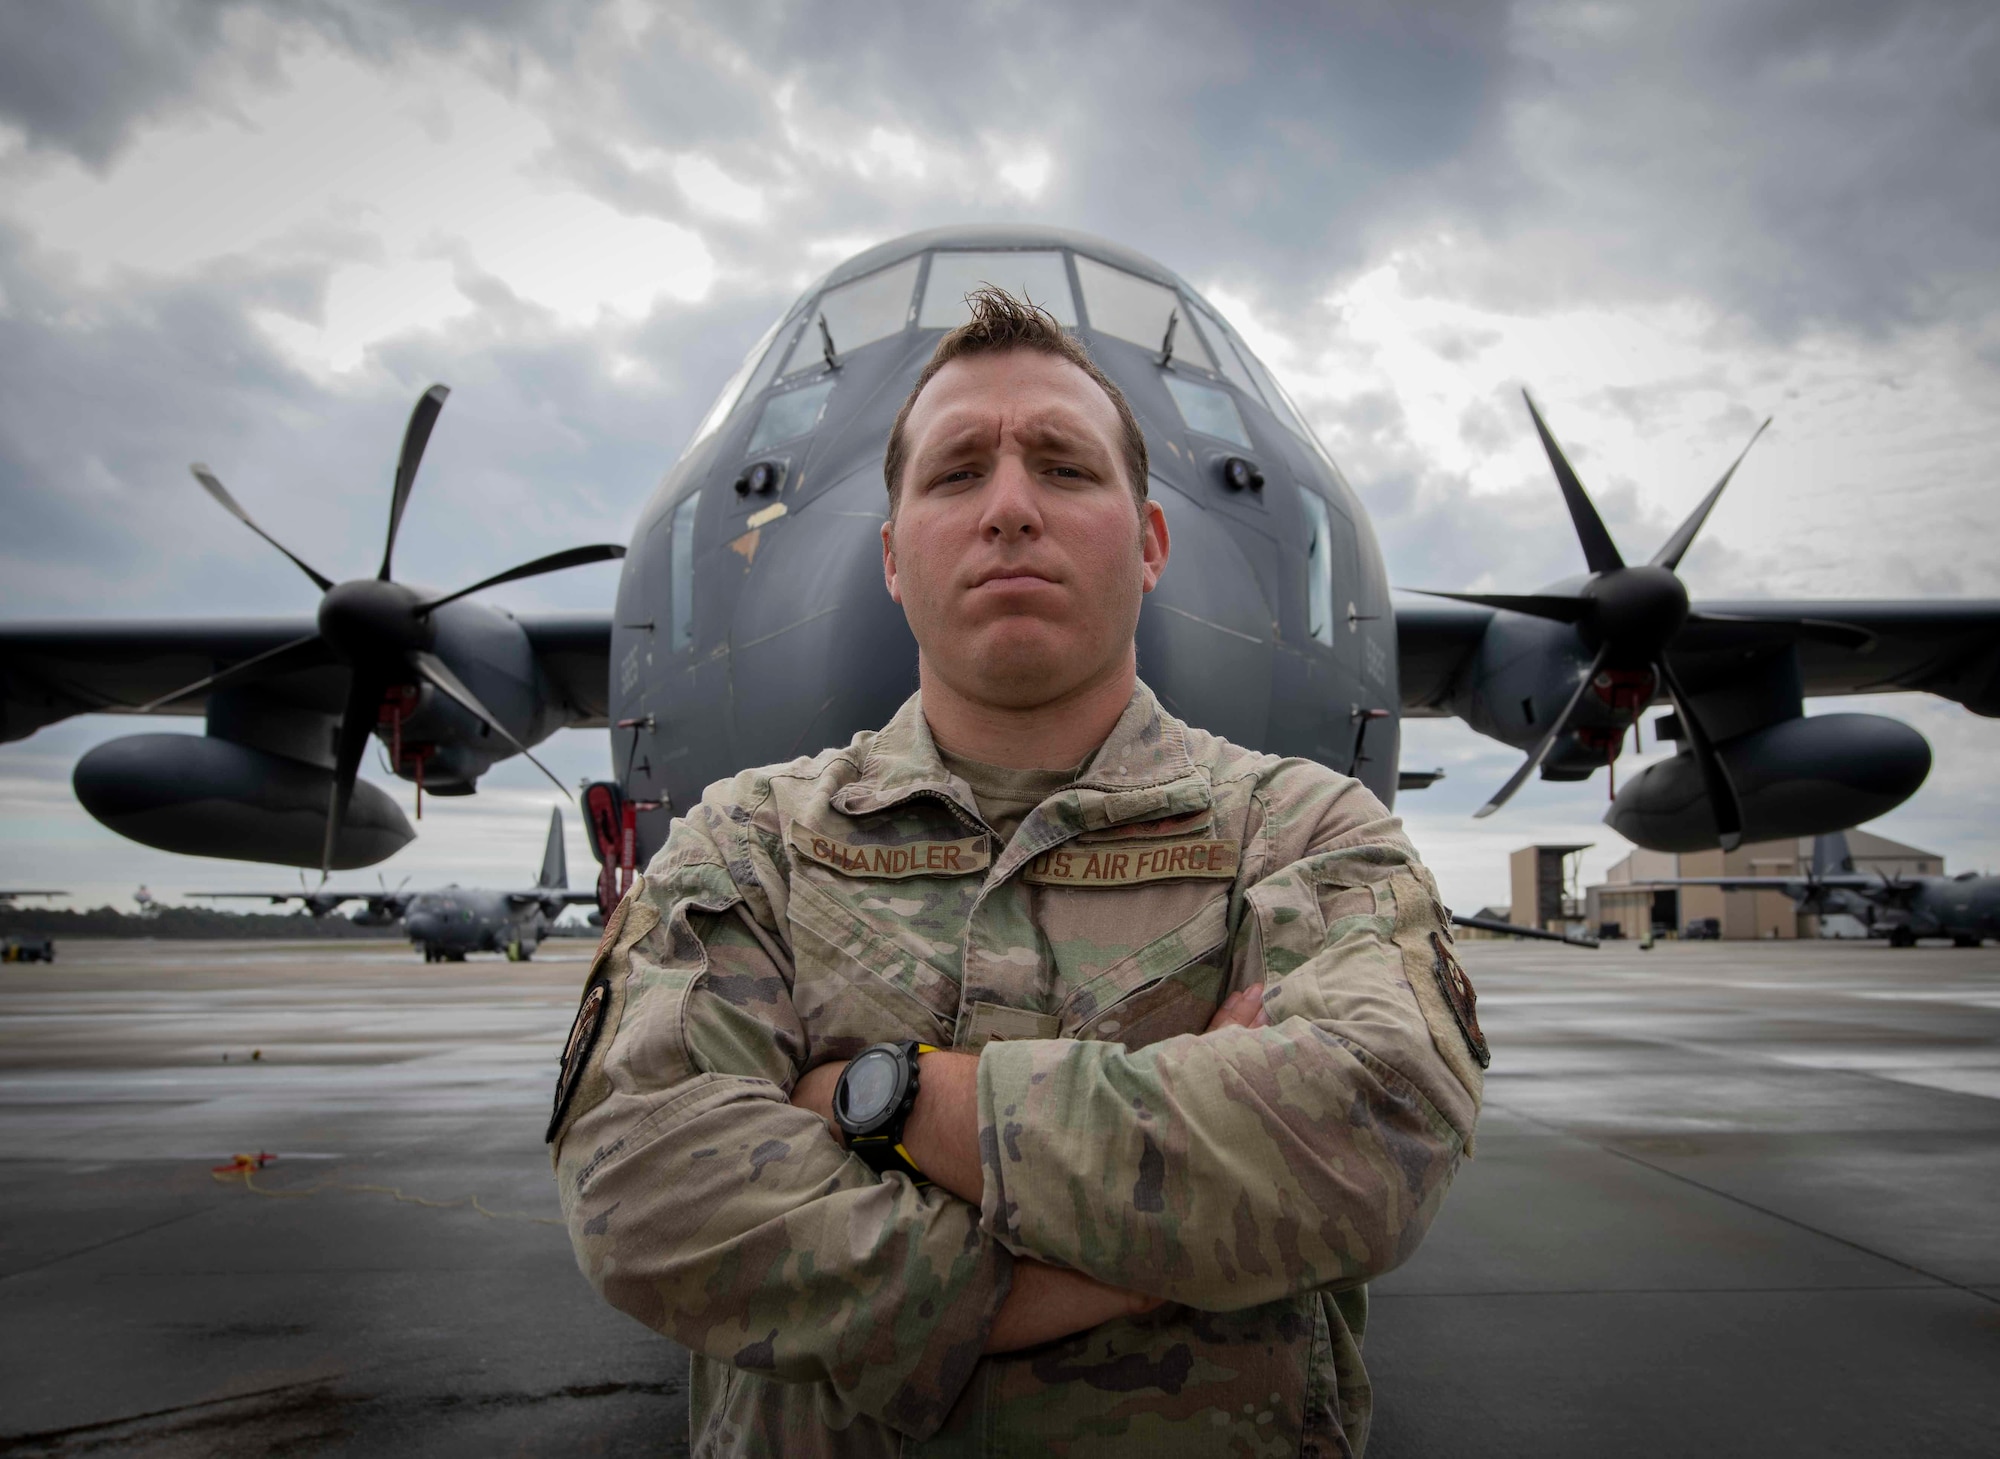 U.S. Air Force Tech. Sgt. Vincent Chandler, a special missions aviator with the 73rd Special Operations Squadron, stands in front of an AC-130J Ghostrider gunship at Hurlburt Field, Florida.